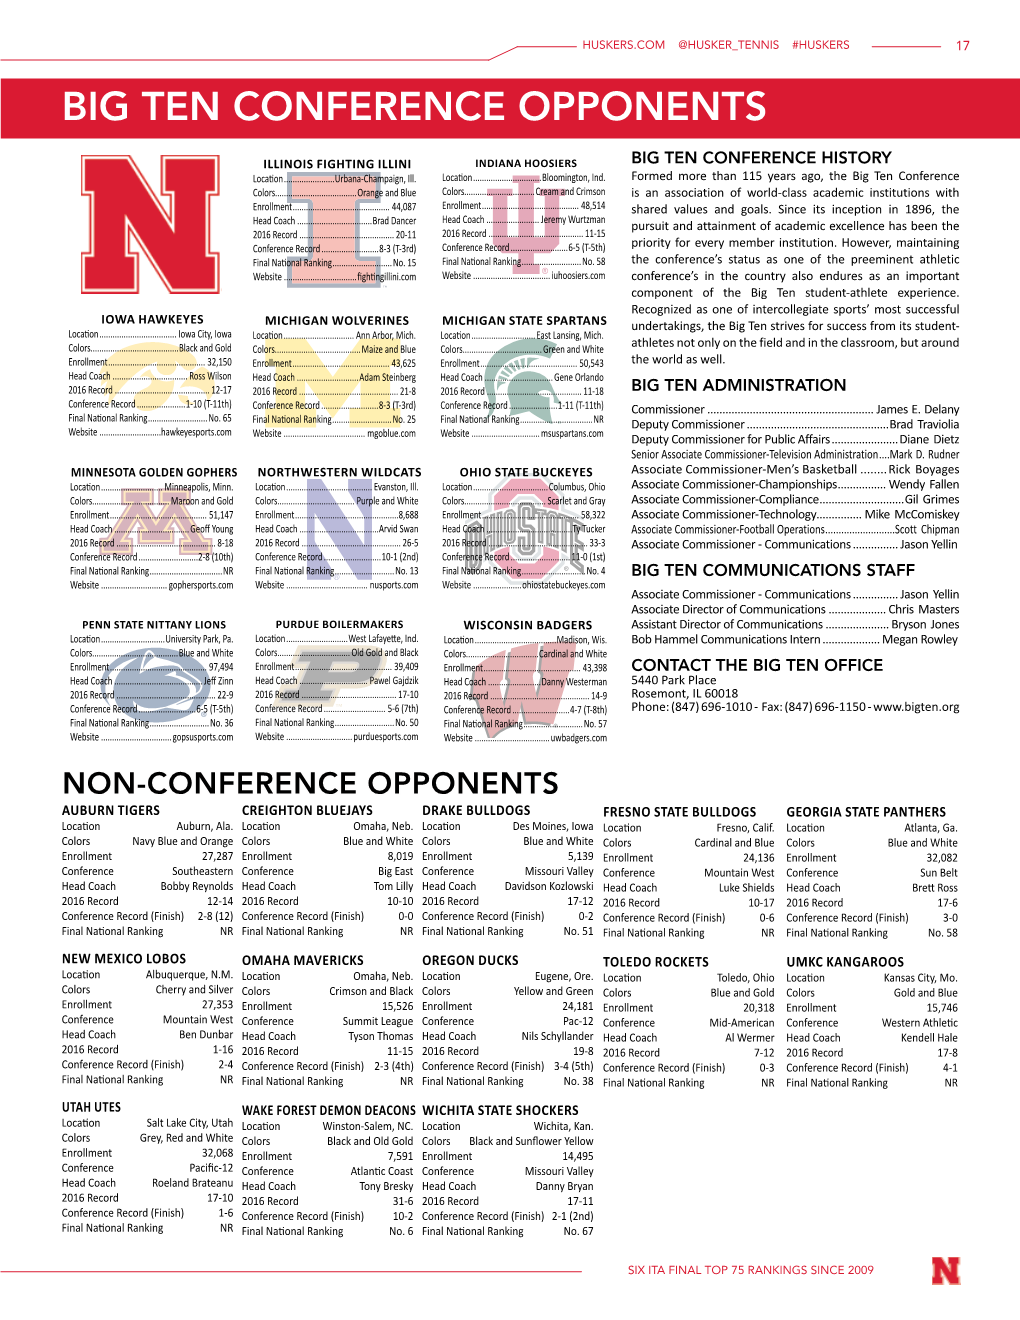 Big Ten Conference Opponents Nking